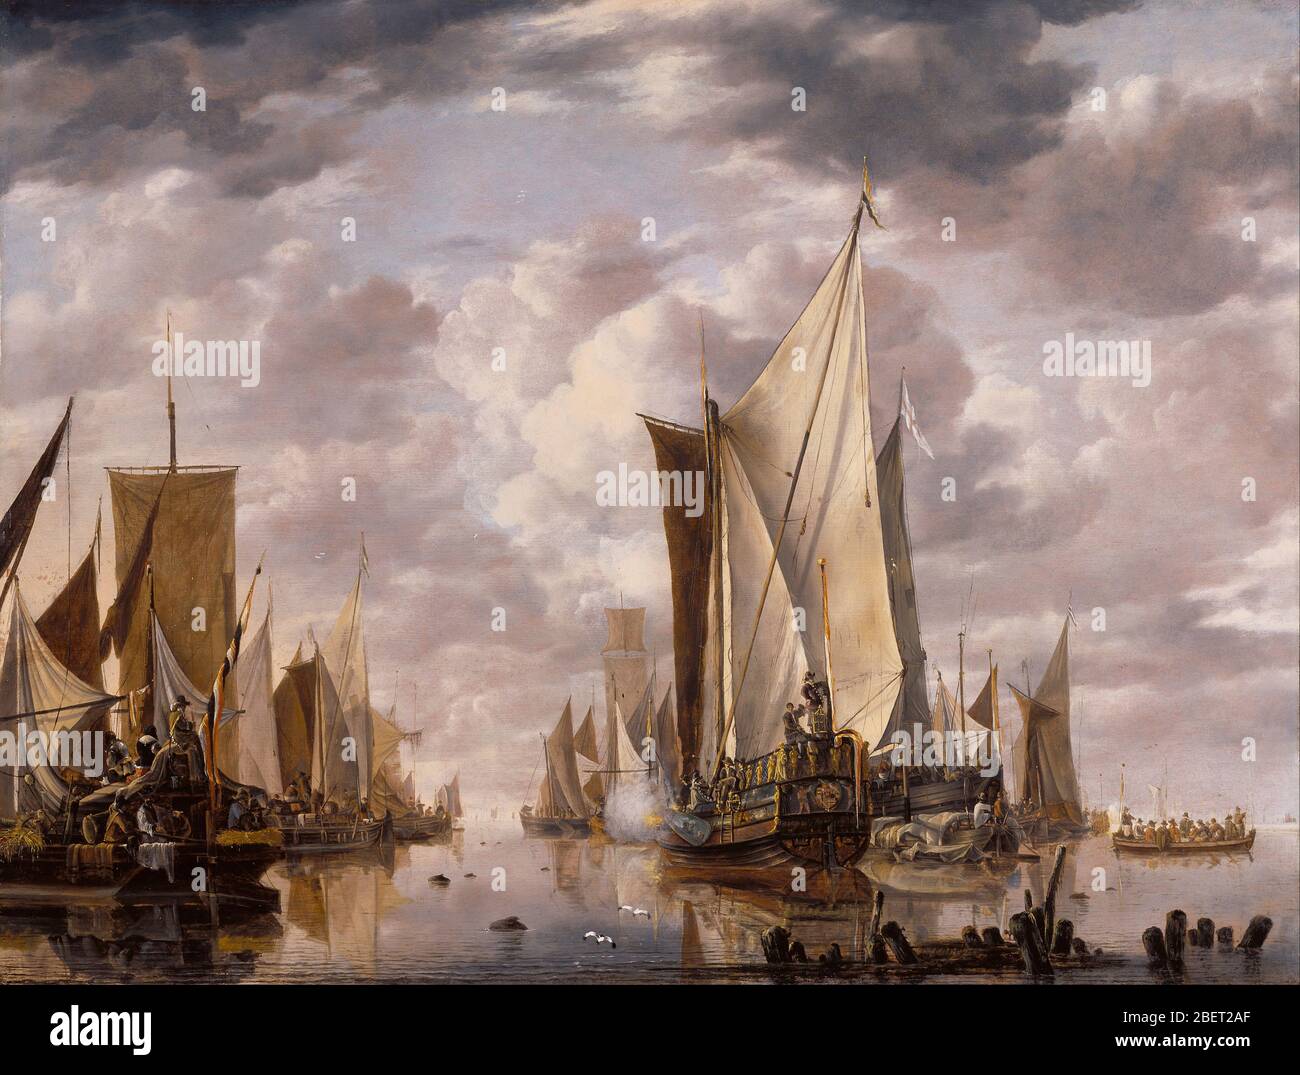 17th century oil painting of Dutch East India Company grand ships at the Dutch port of Flushing. Stock Photo